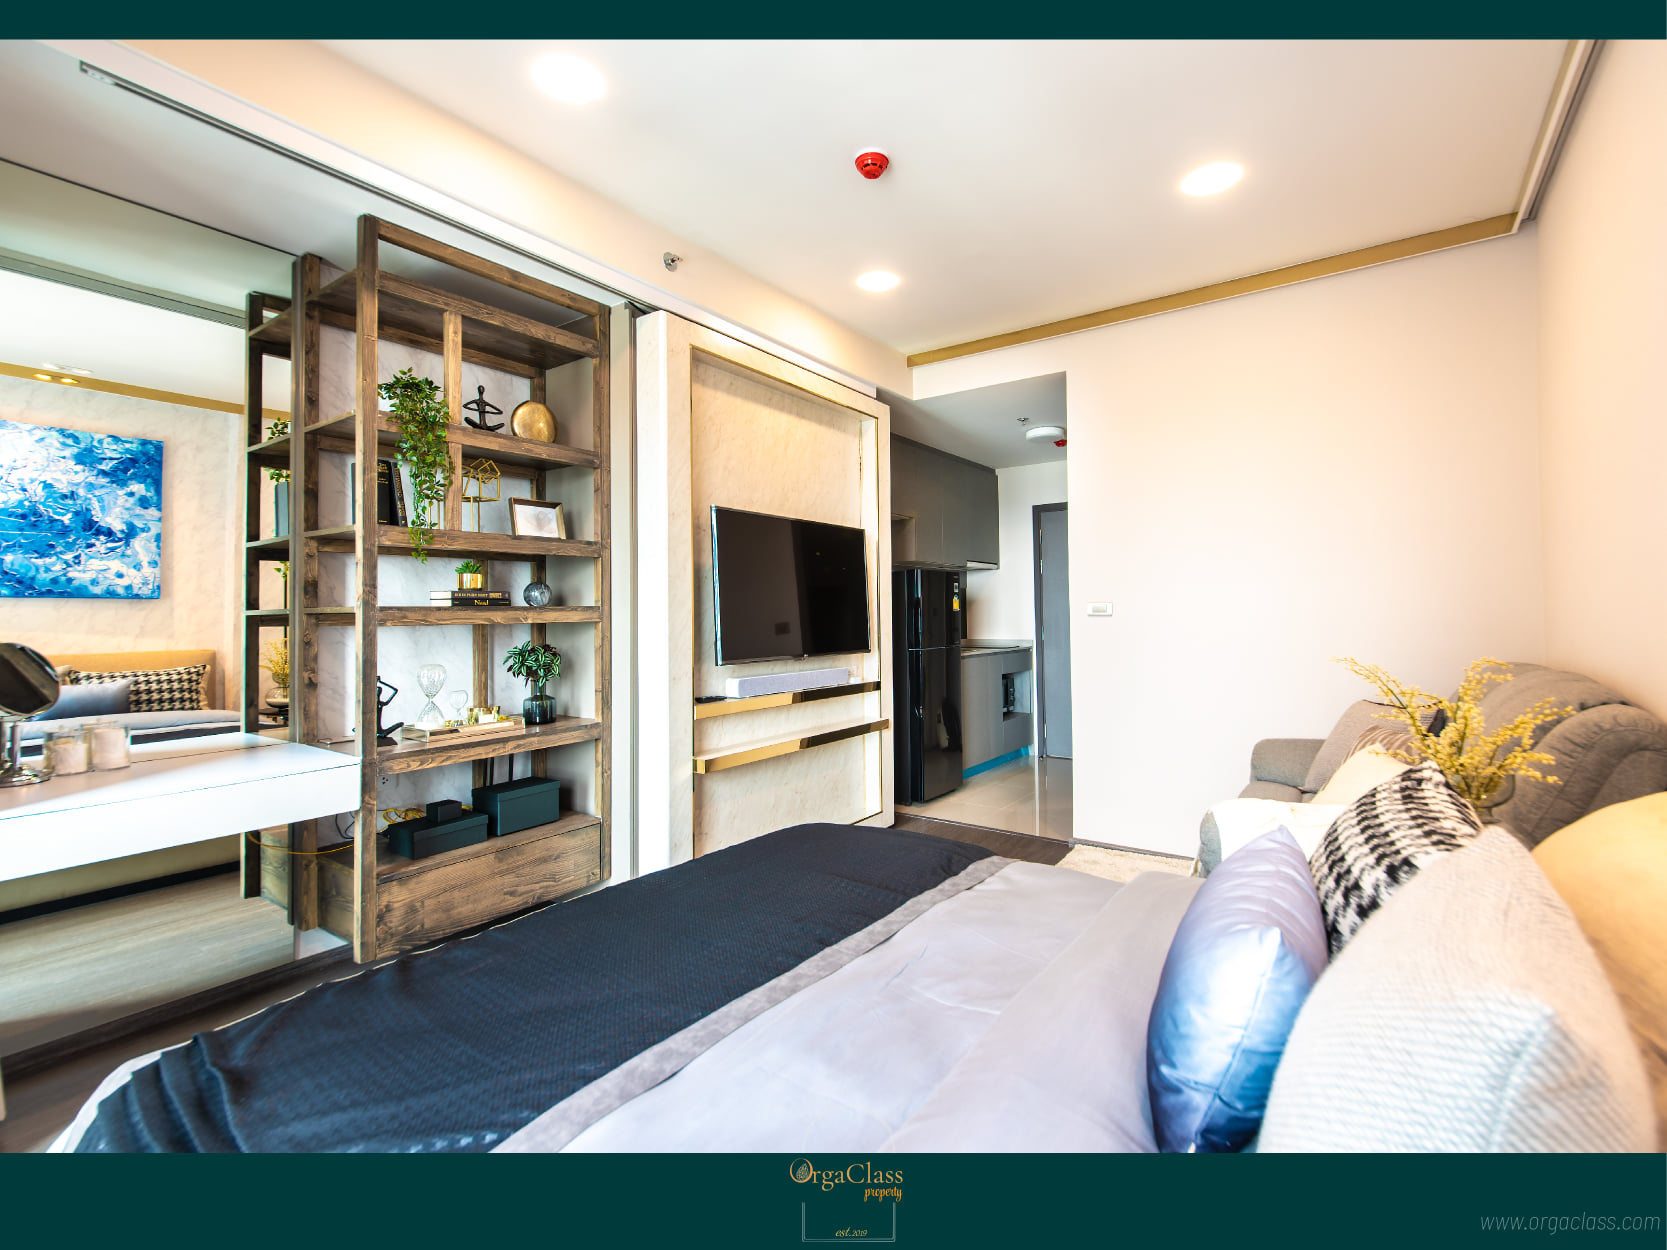 【Rent- Ideo Sukhumvit 93 - Hot Deals only last month of the year 2022 December:12,500฿/month】